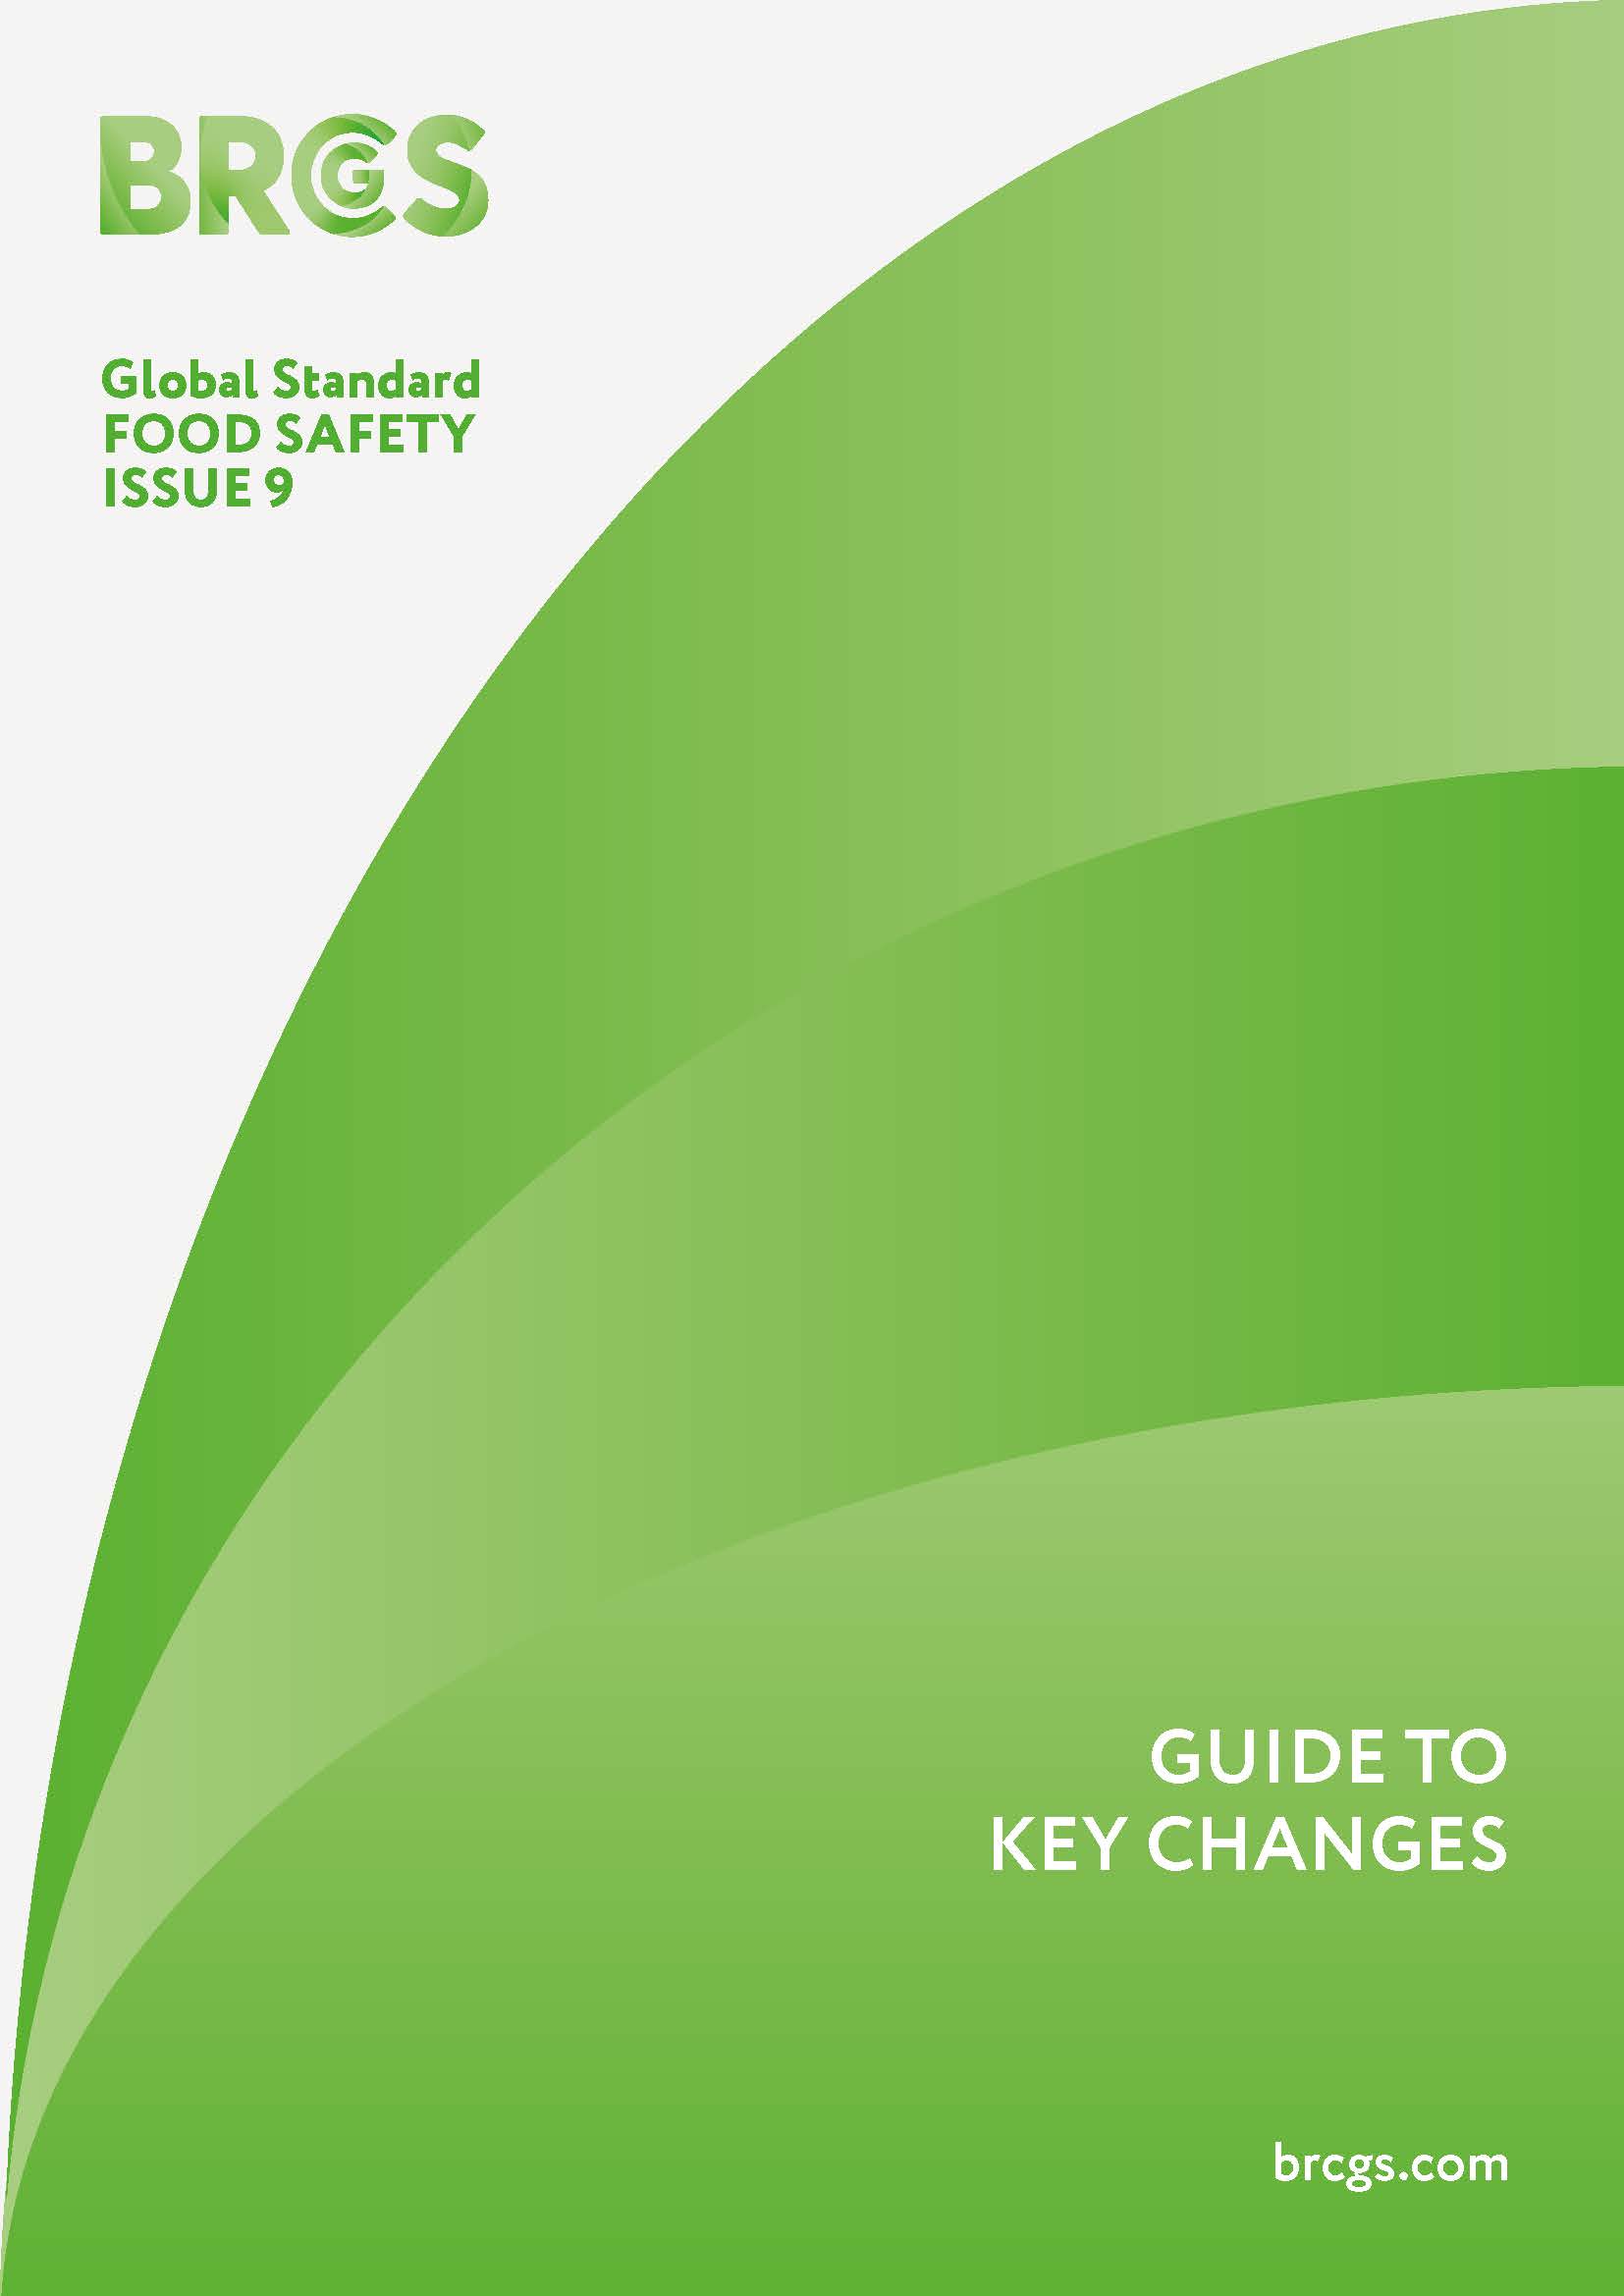 Global Standard Food Safety (Issue 9) Guide to Key Changes